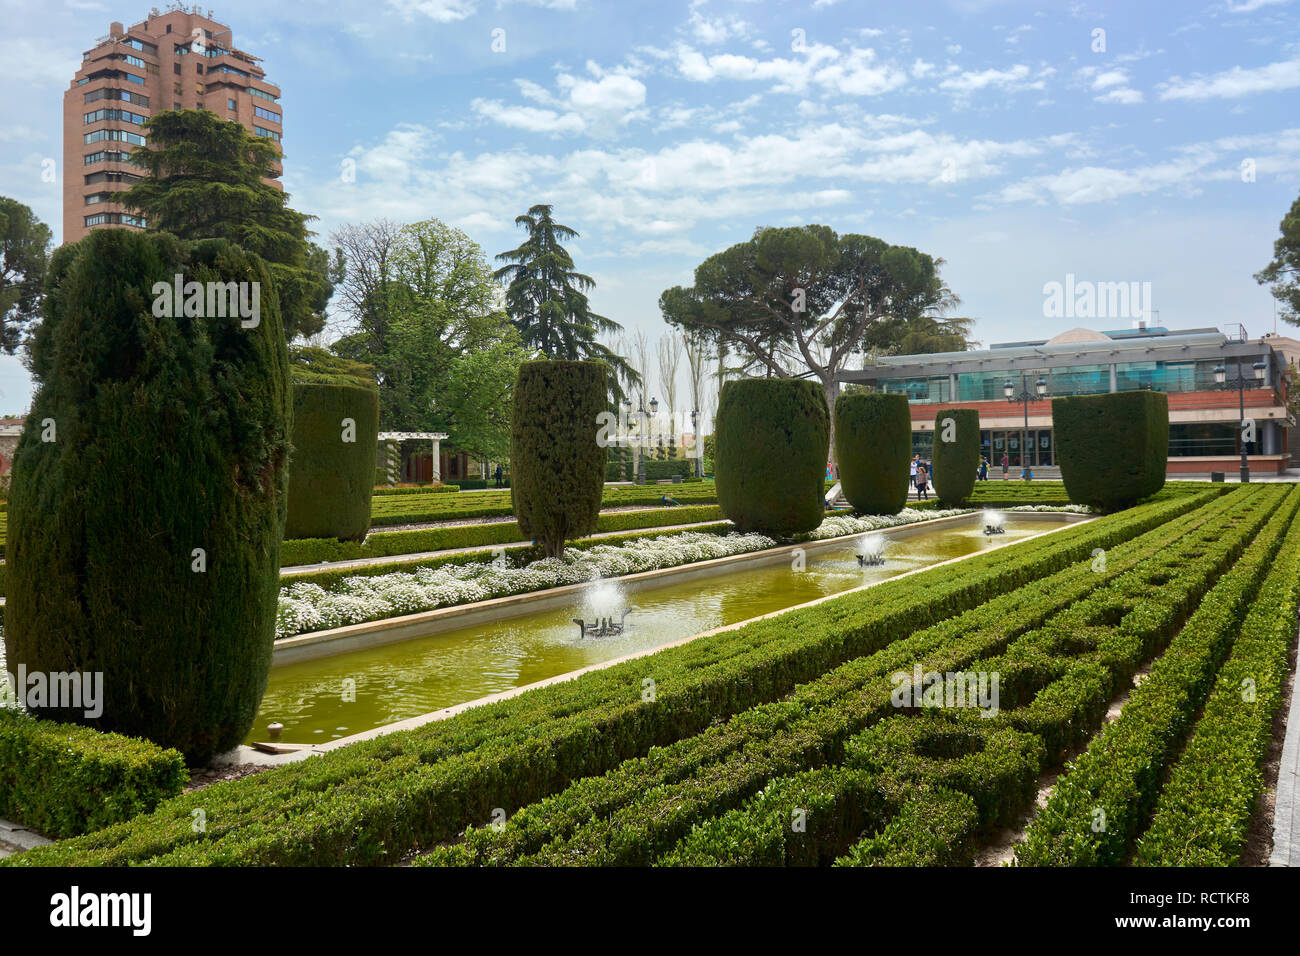 Water pond, plants and trees inside the Gardens of Cecilio Rodriguez, located in the Park of Good Retirement, one of the most famous attractions in Ma Stock Photo